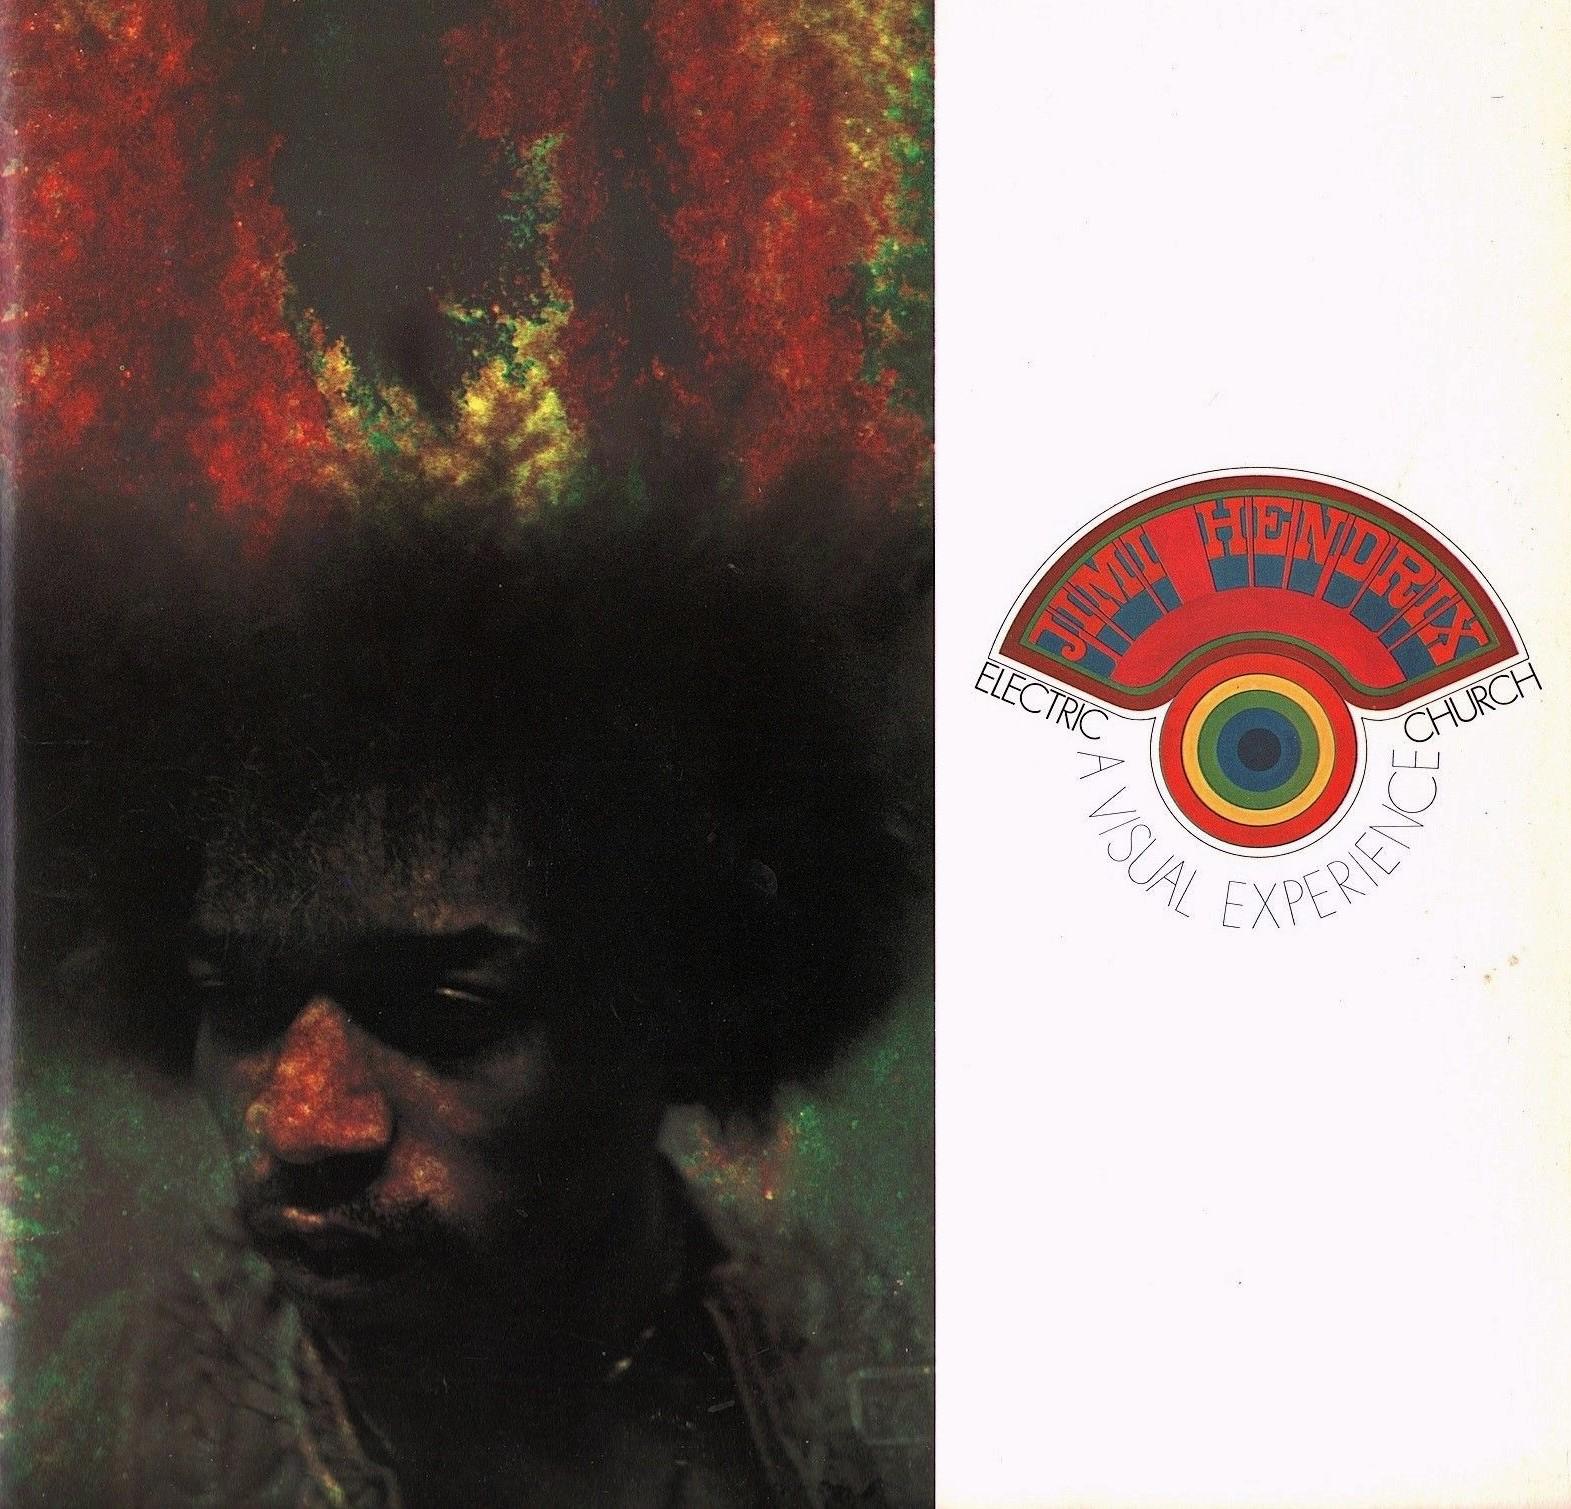 Jimi Hendrix 1969 Electric Church a Visual Experience Tour Program Book For Sale 2